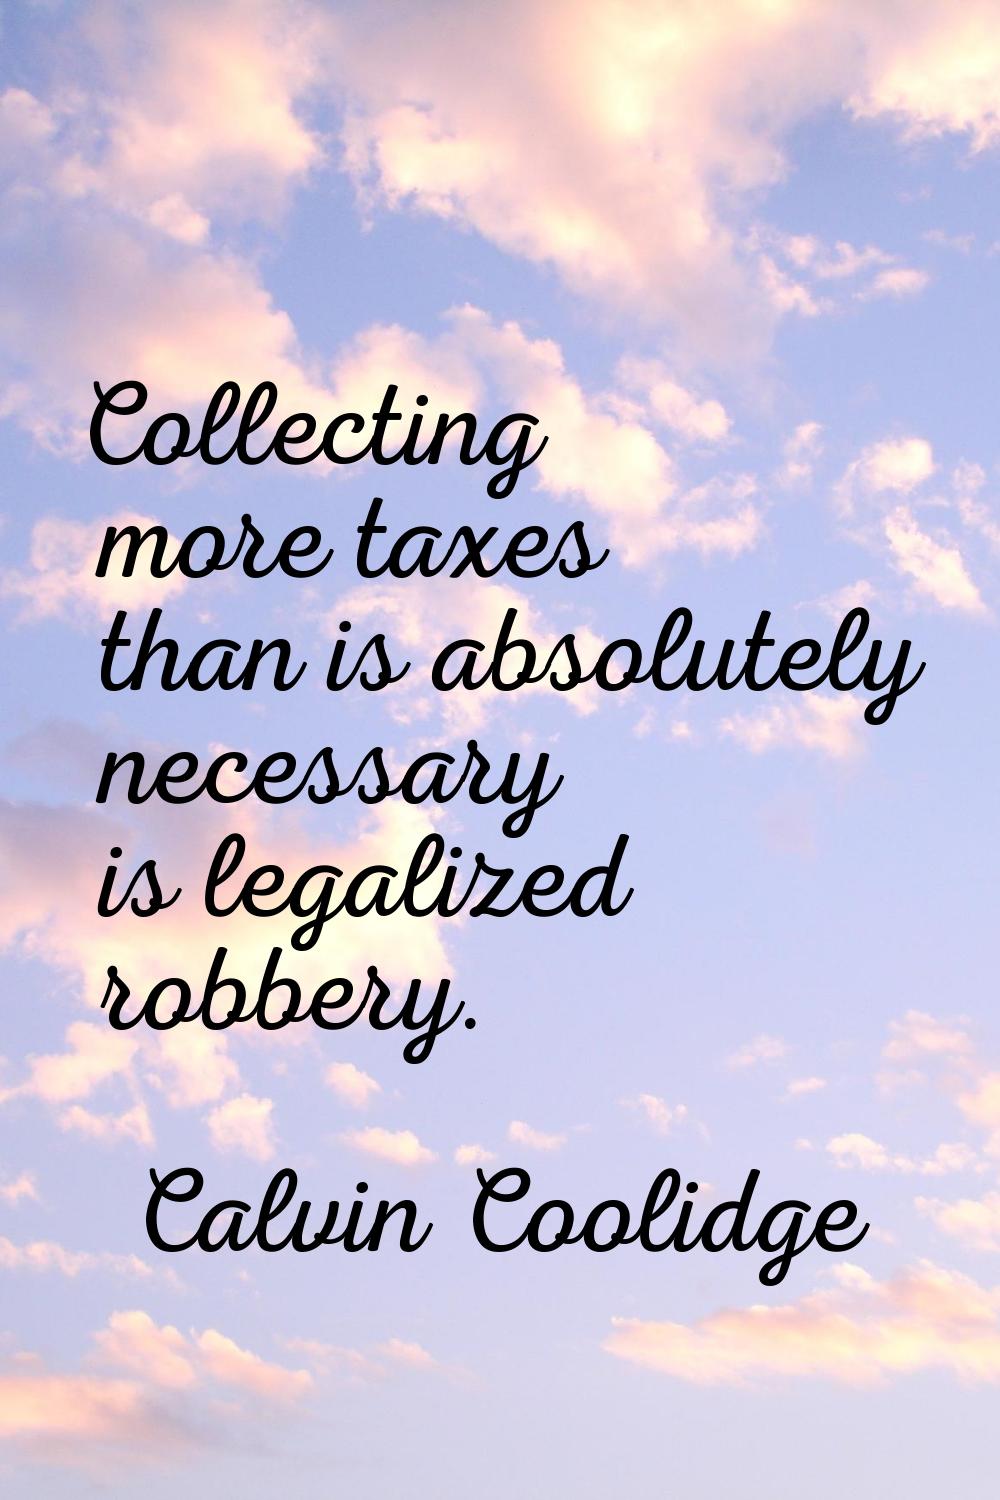 Collecting more taxes than is absolutely necessary is legalized robbery.